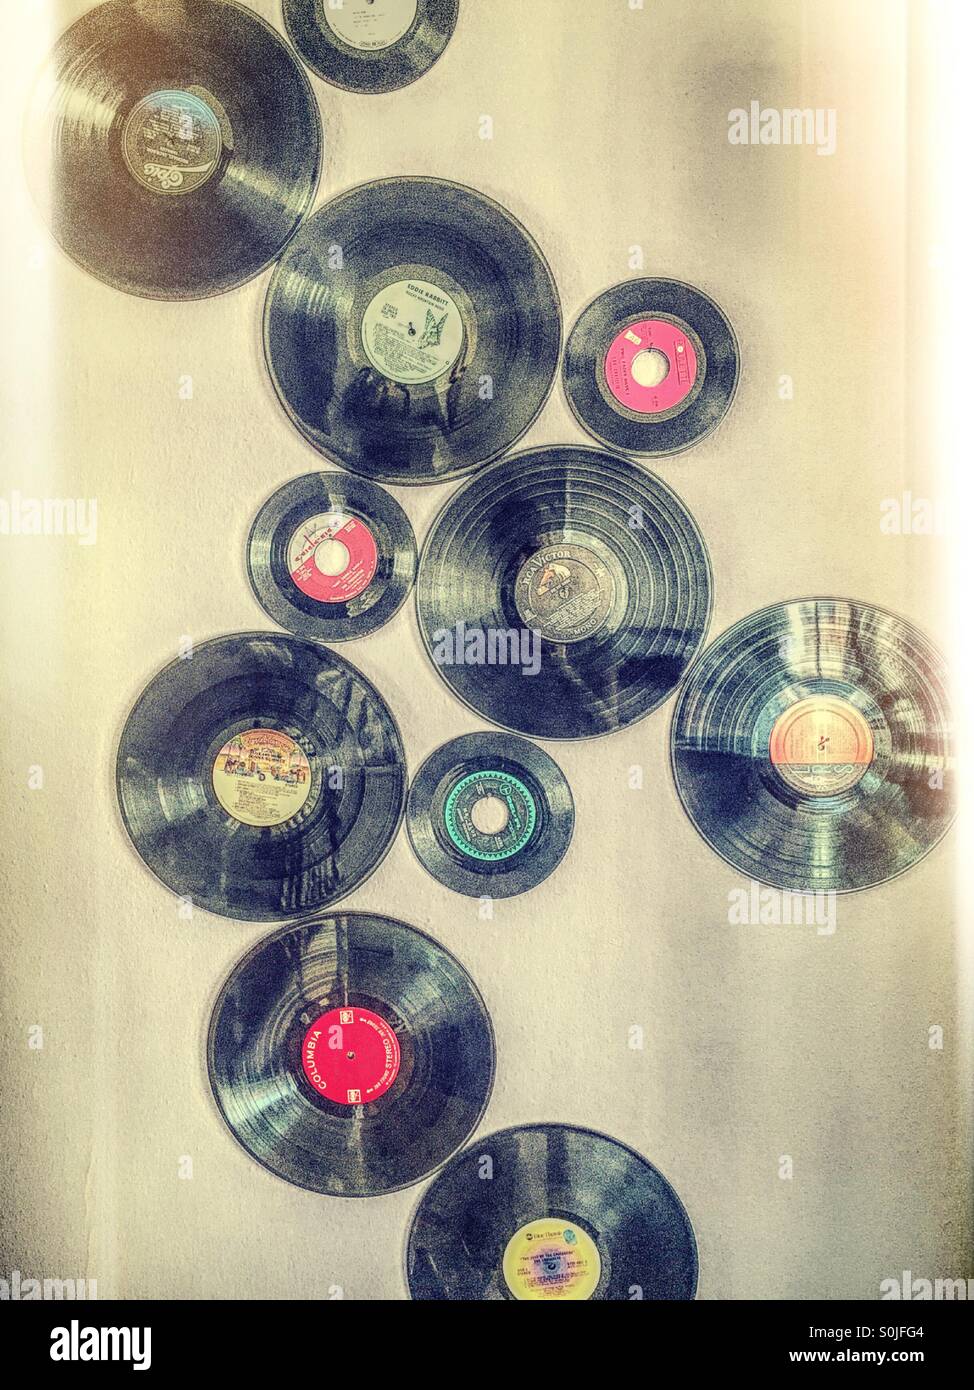 Vintage vinyl records both 45's and 33 long playing. Stock Photo